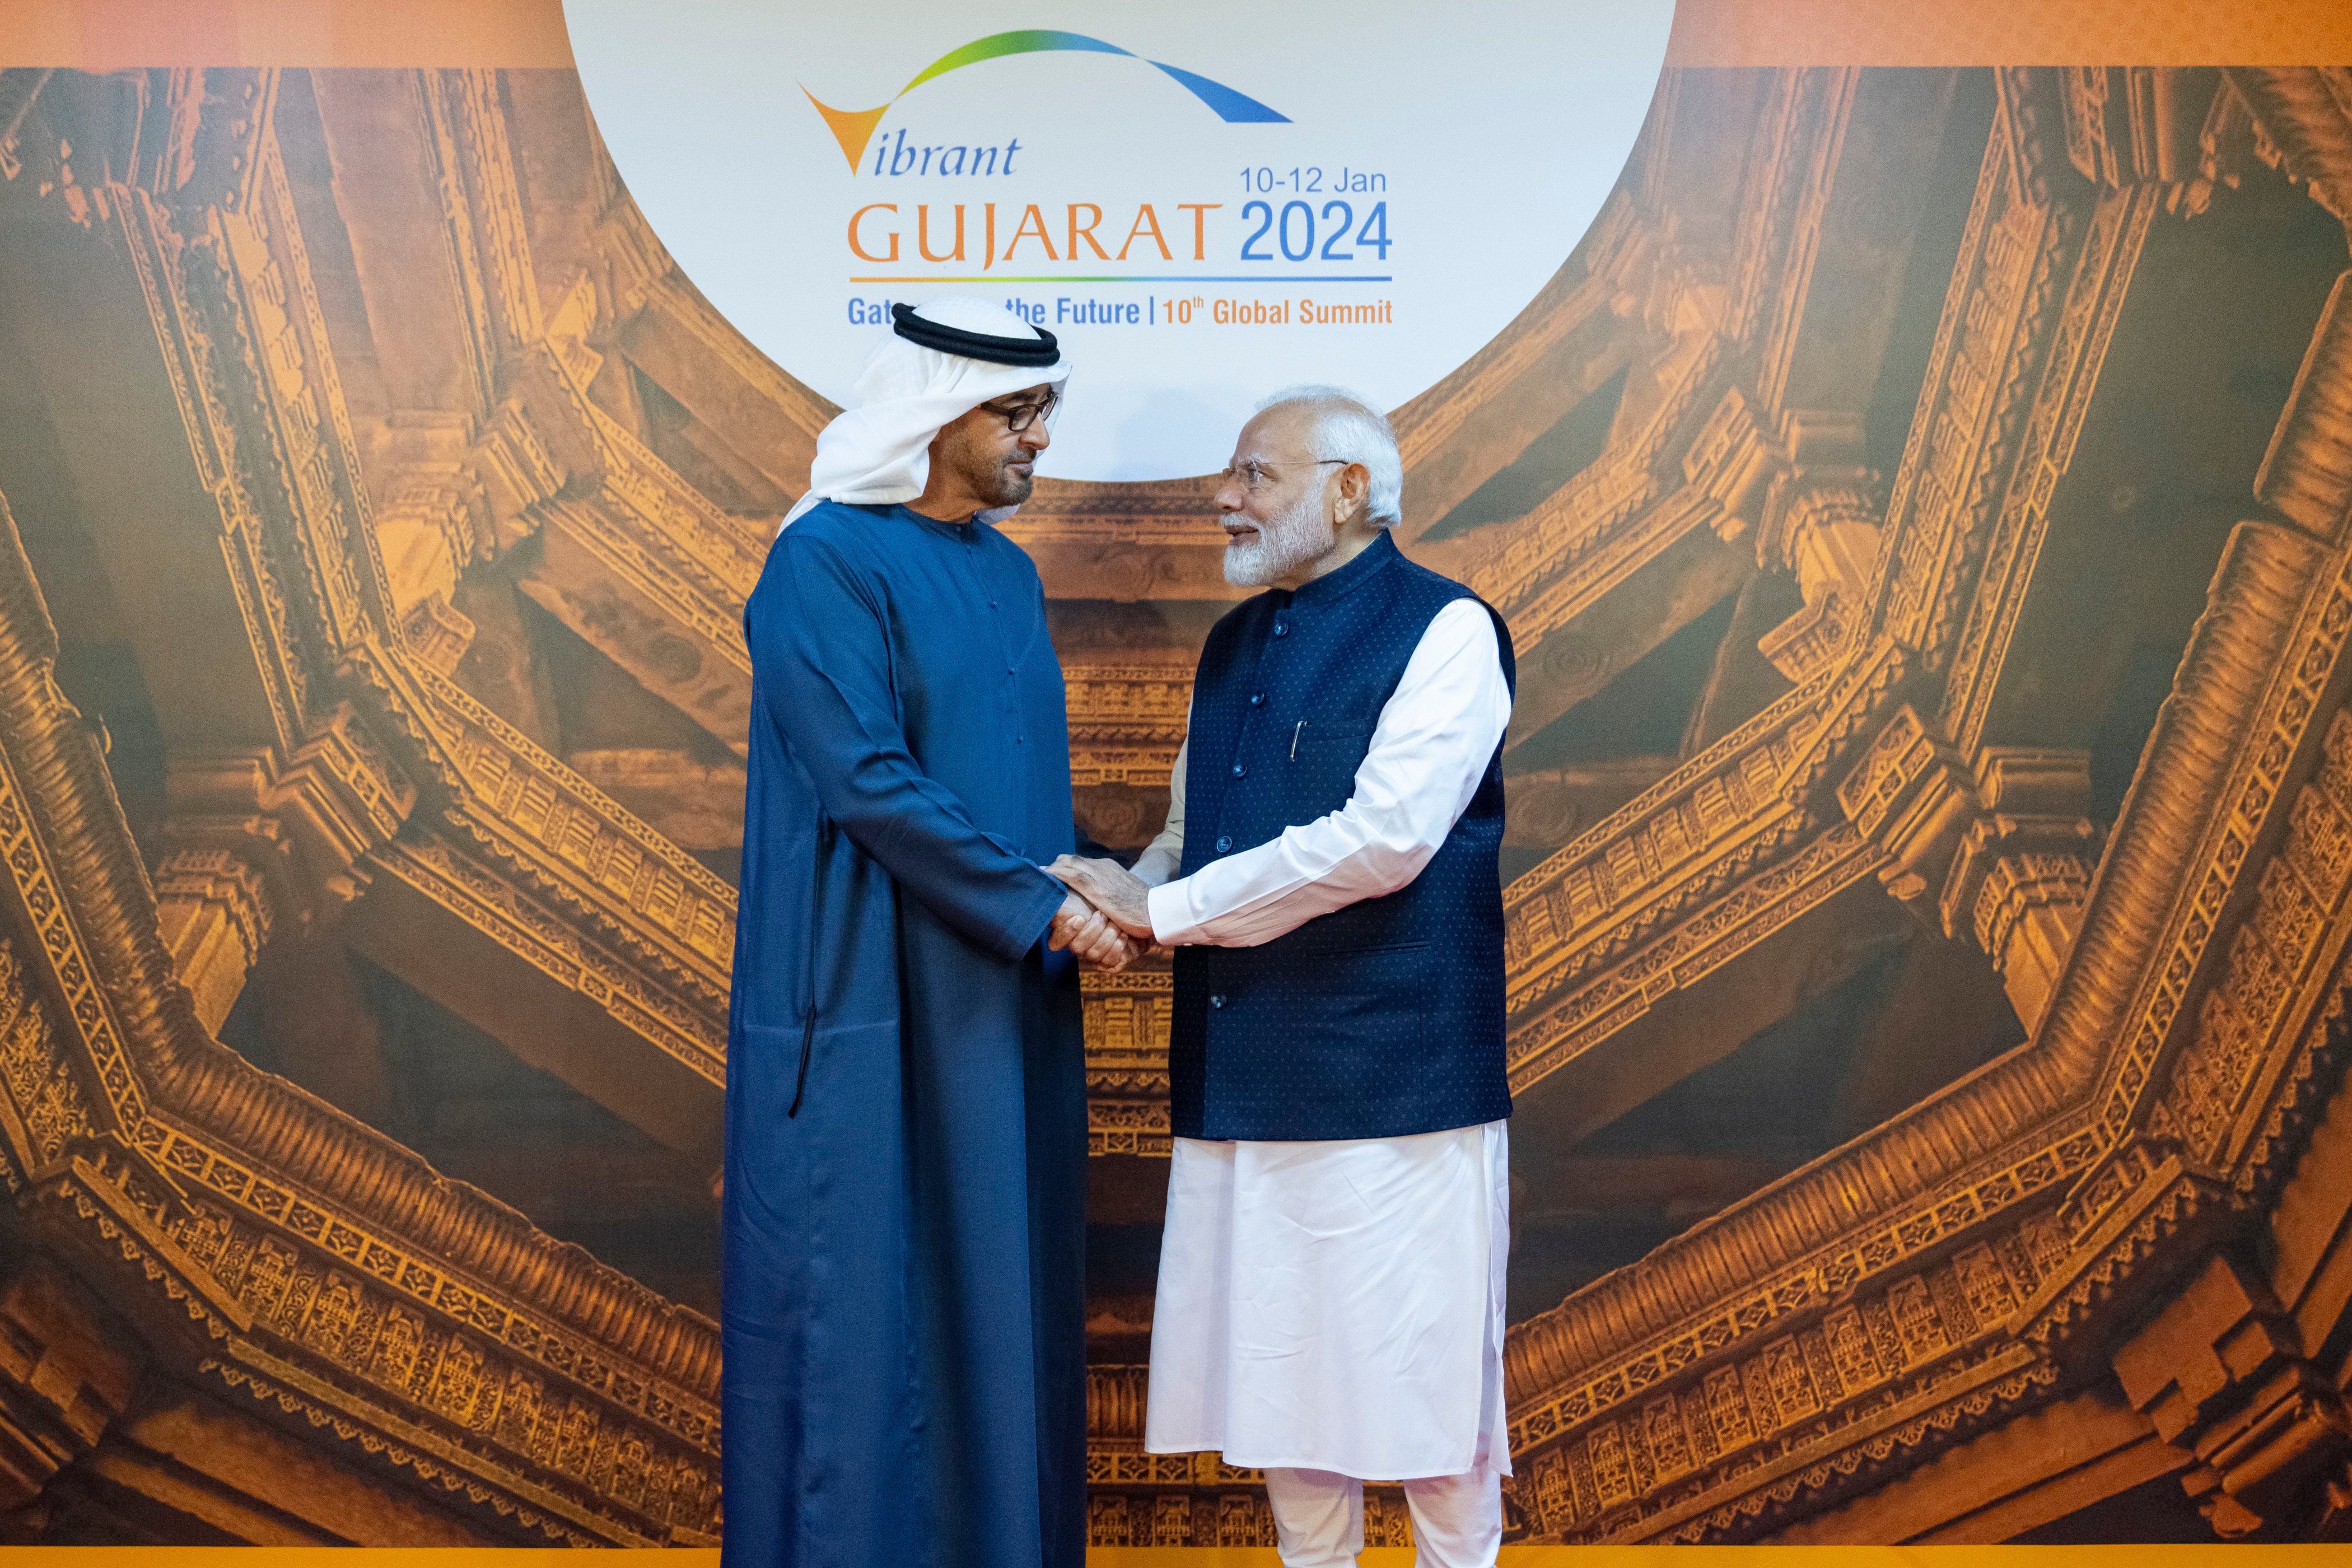 where are energy ties between the uae and india headed?